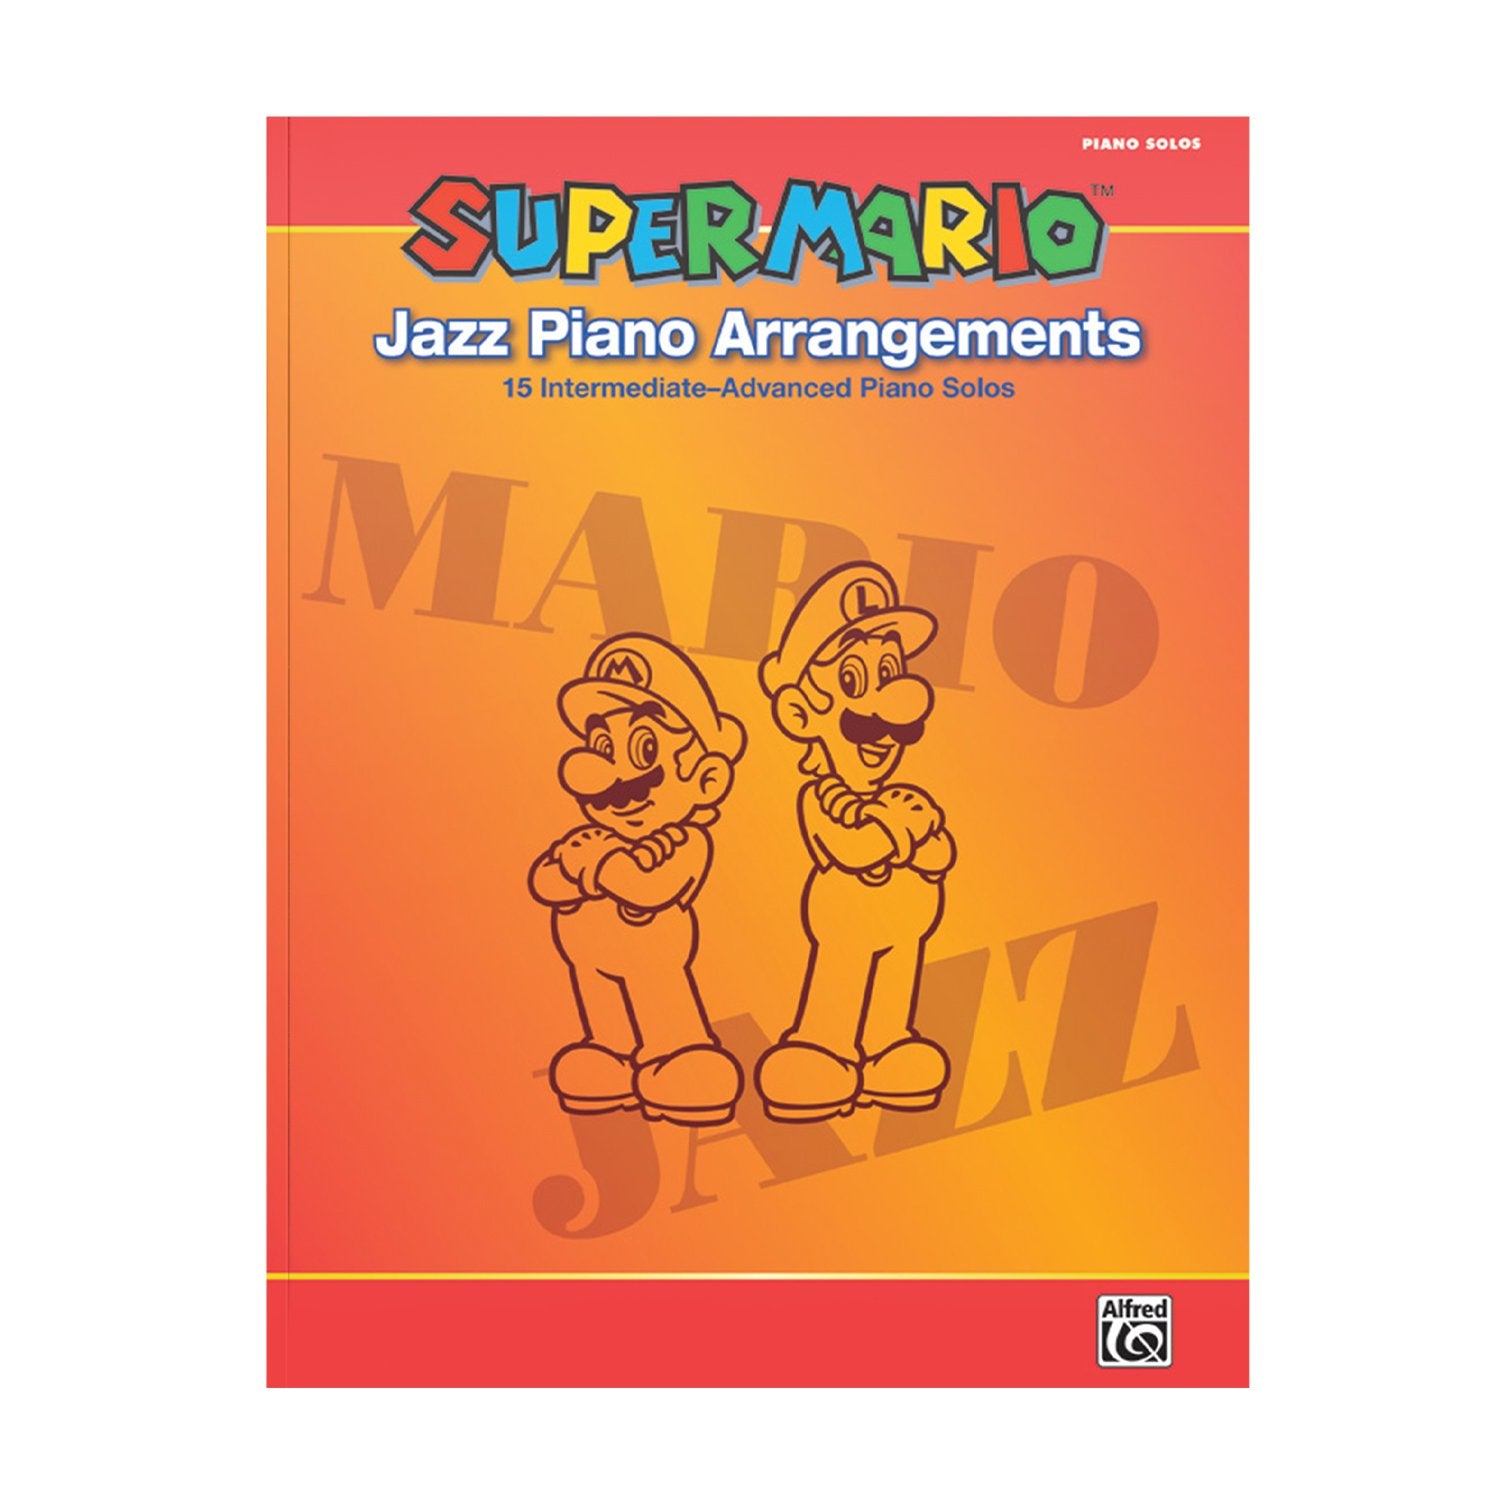 Alfred Music New Super Mario Bros. Wii favorable buying at our shop